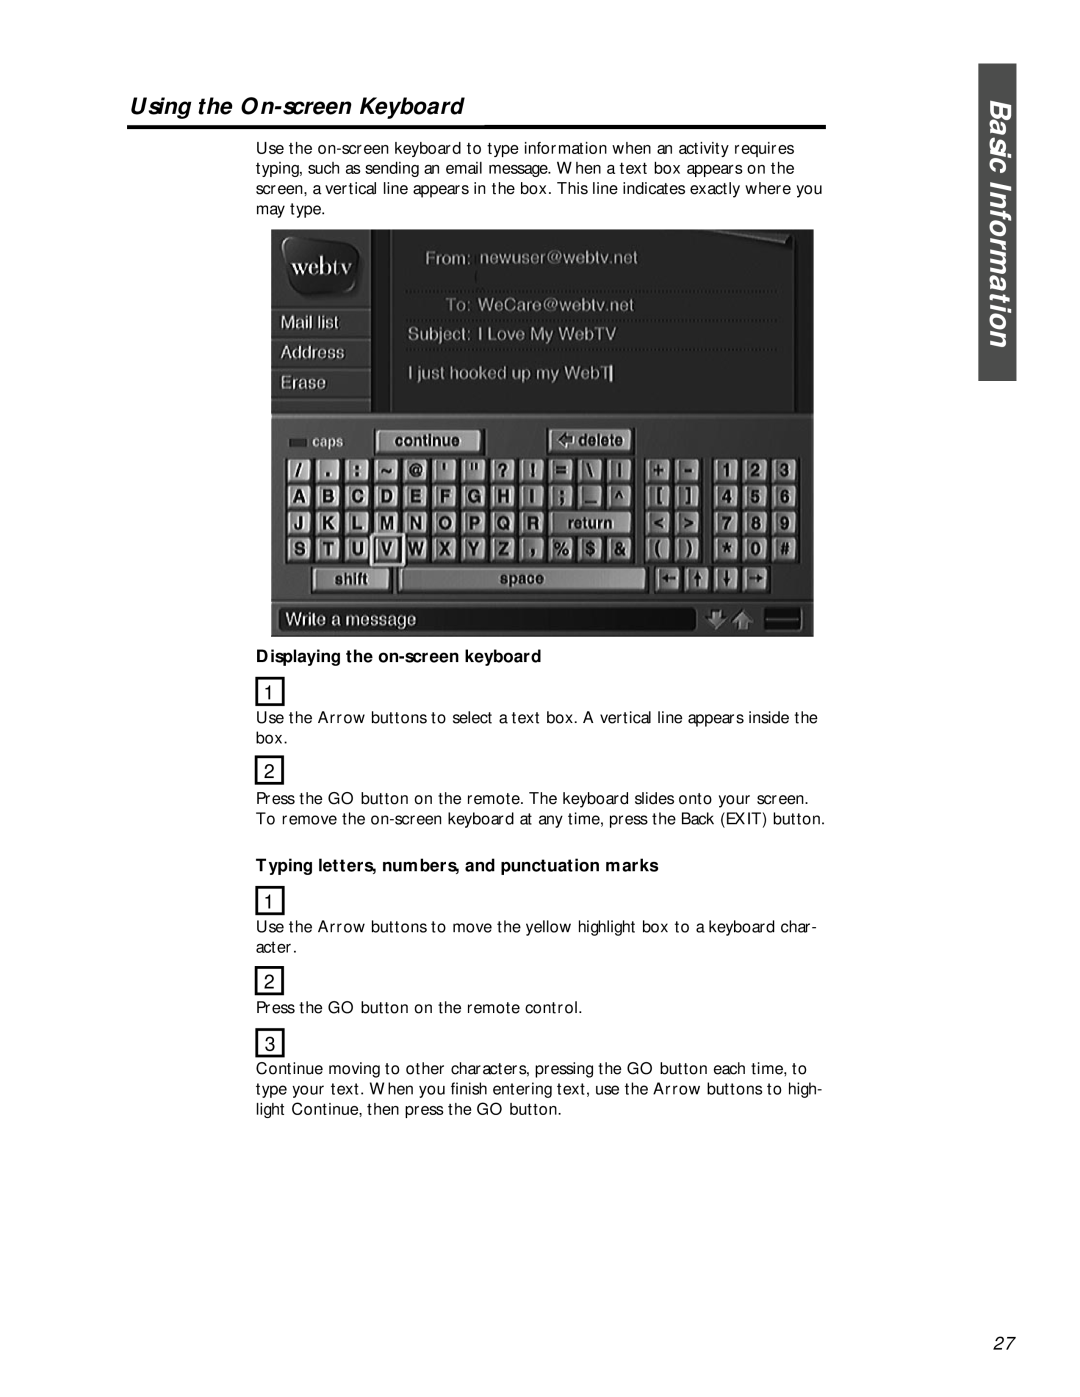 Philips MAT972KB QUG owner manual Basic Information, Using the On-screen Keyboard, Displaying the on-screen keyboard 